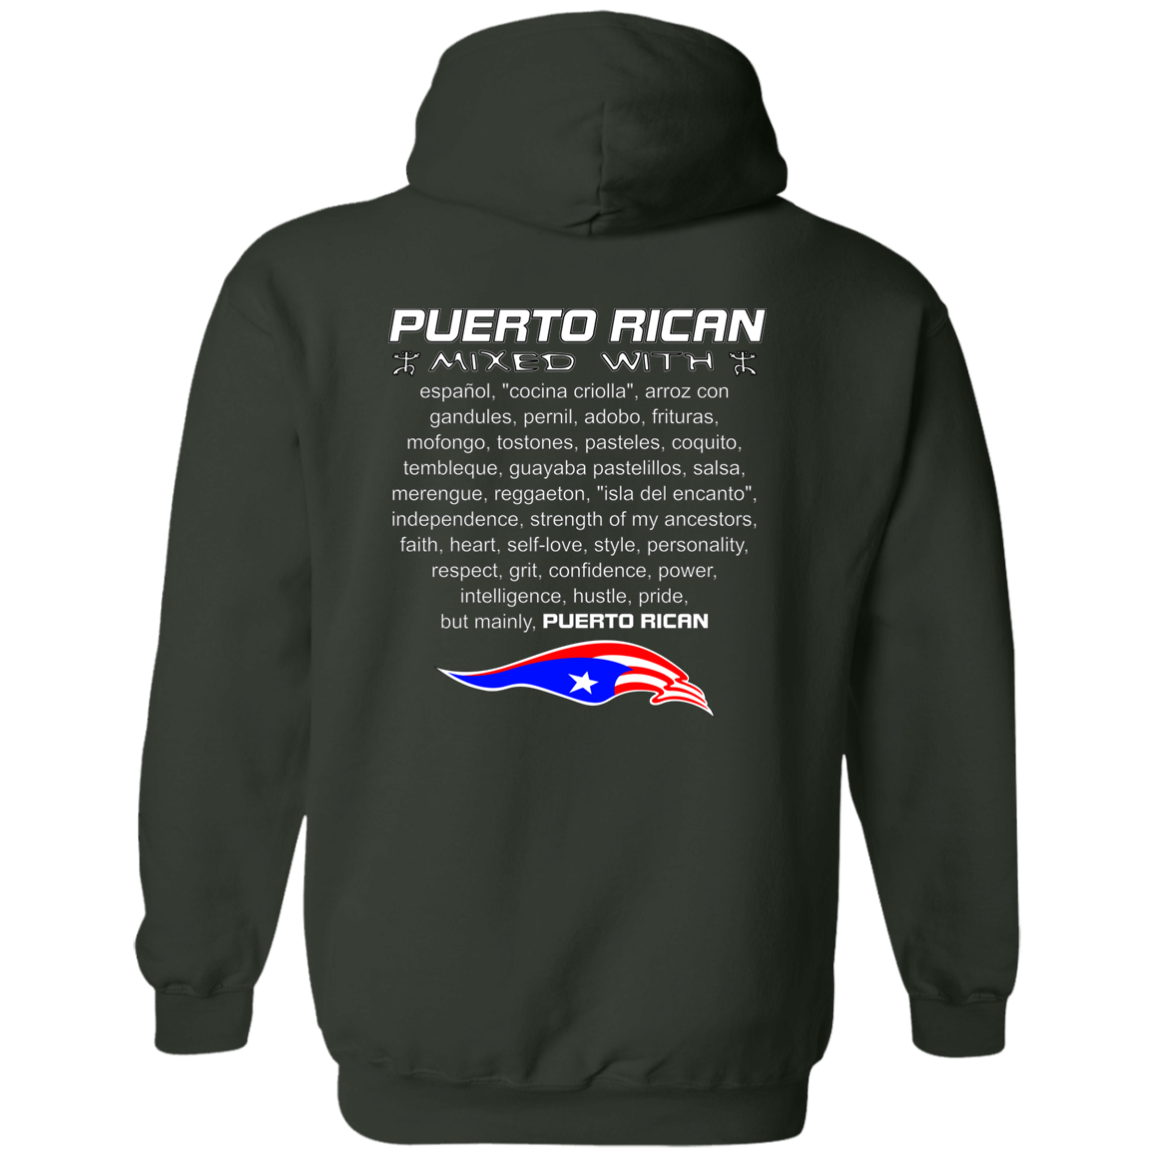 Puerto Rican Mixed With - Hoodie